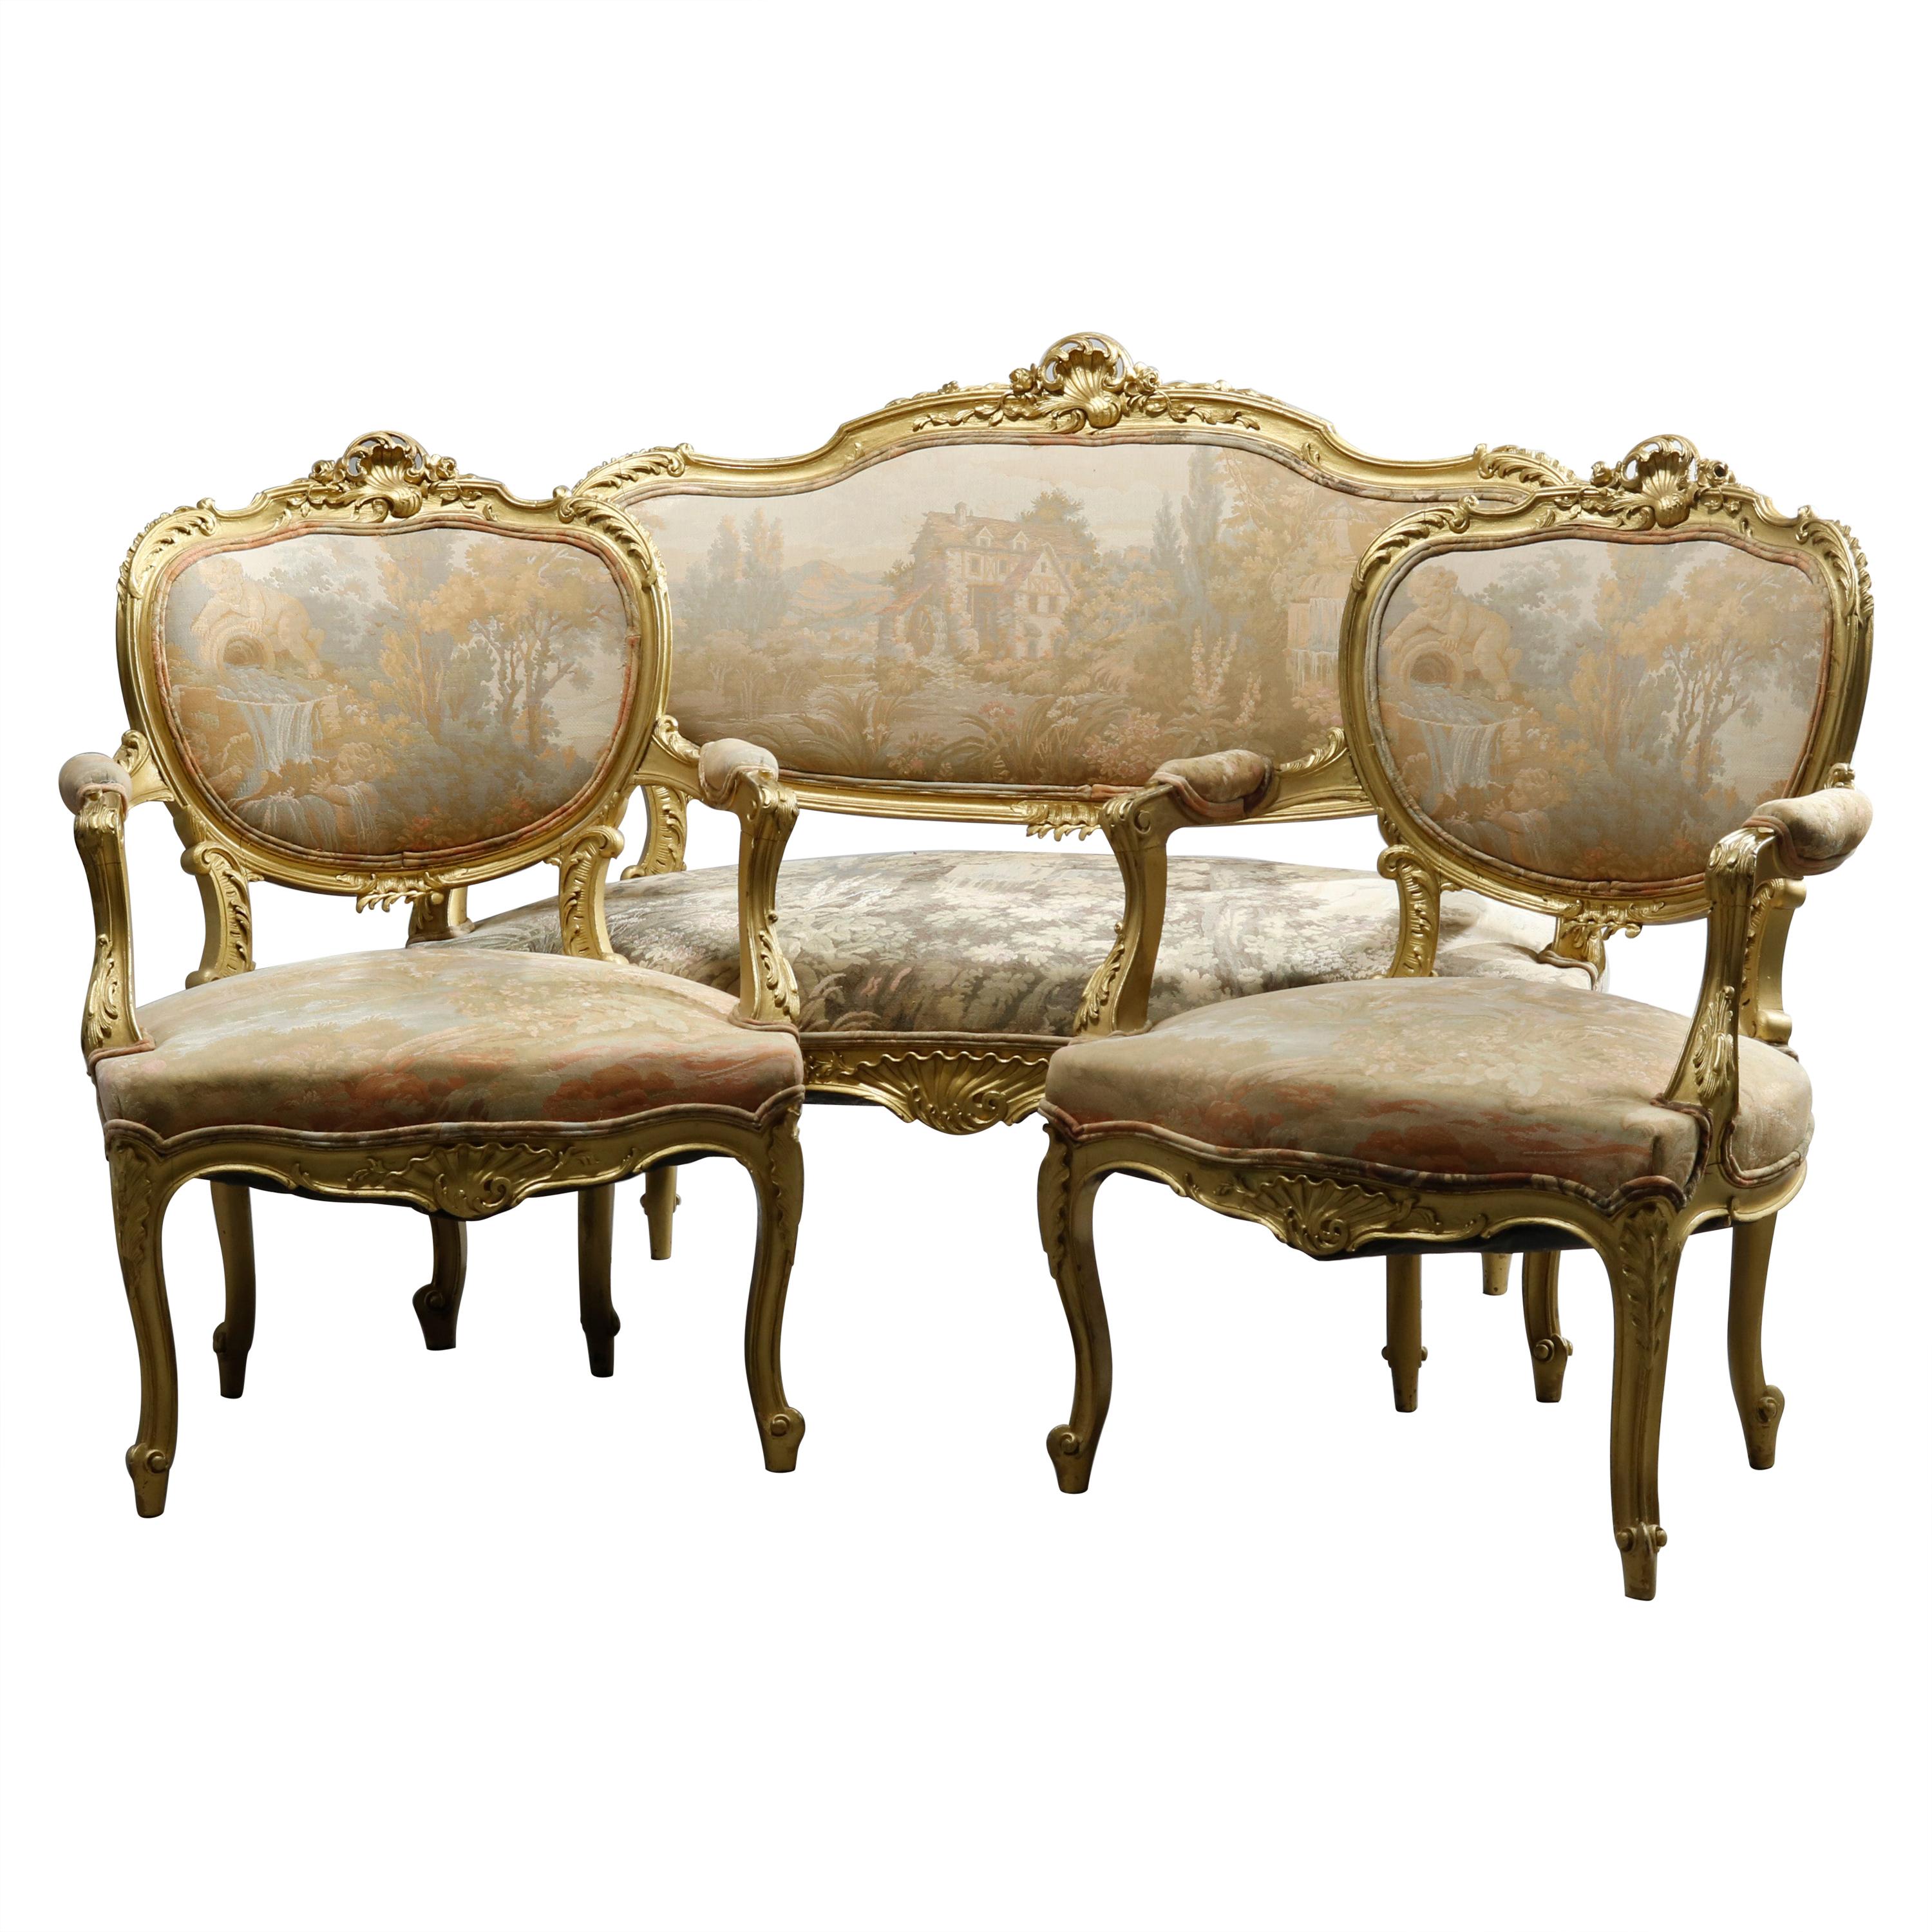 Antique French Rococo Three Piece Giltwood & Tapestry Parlor Set, Circa 1900